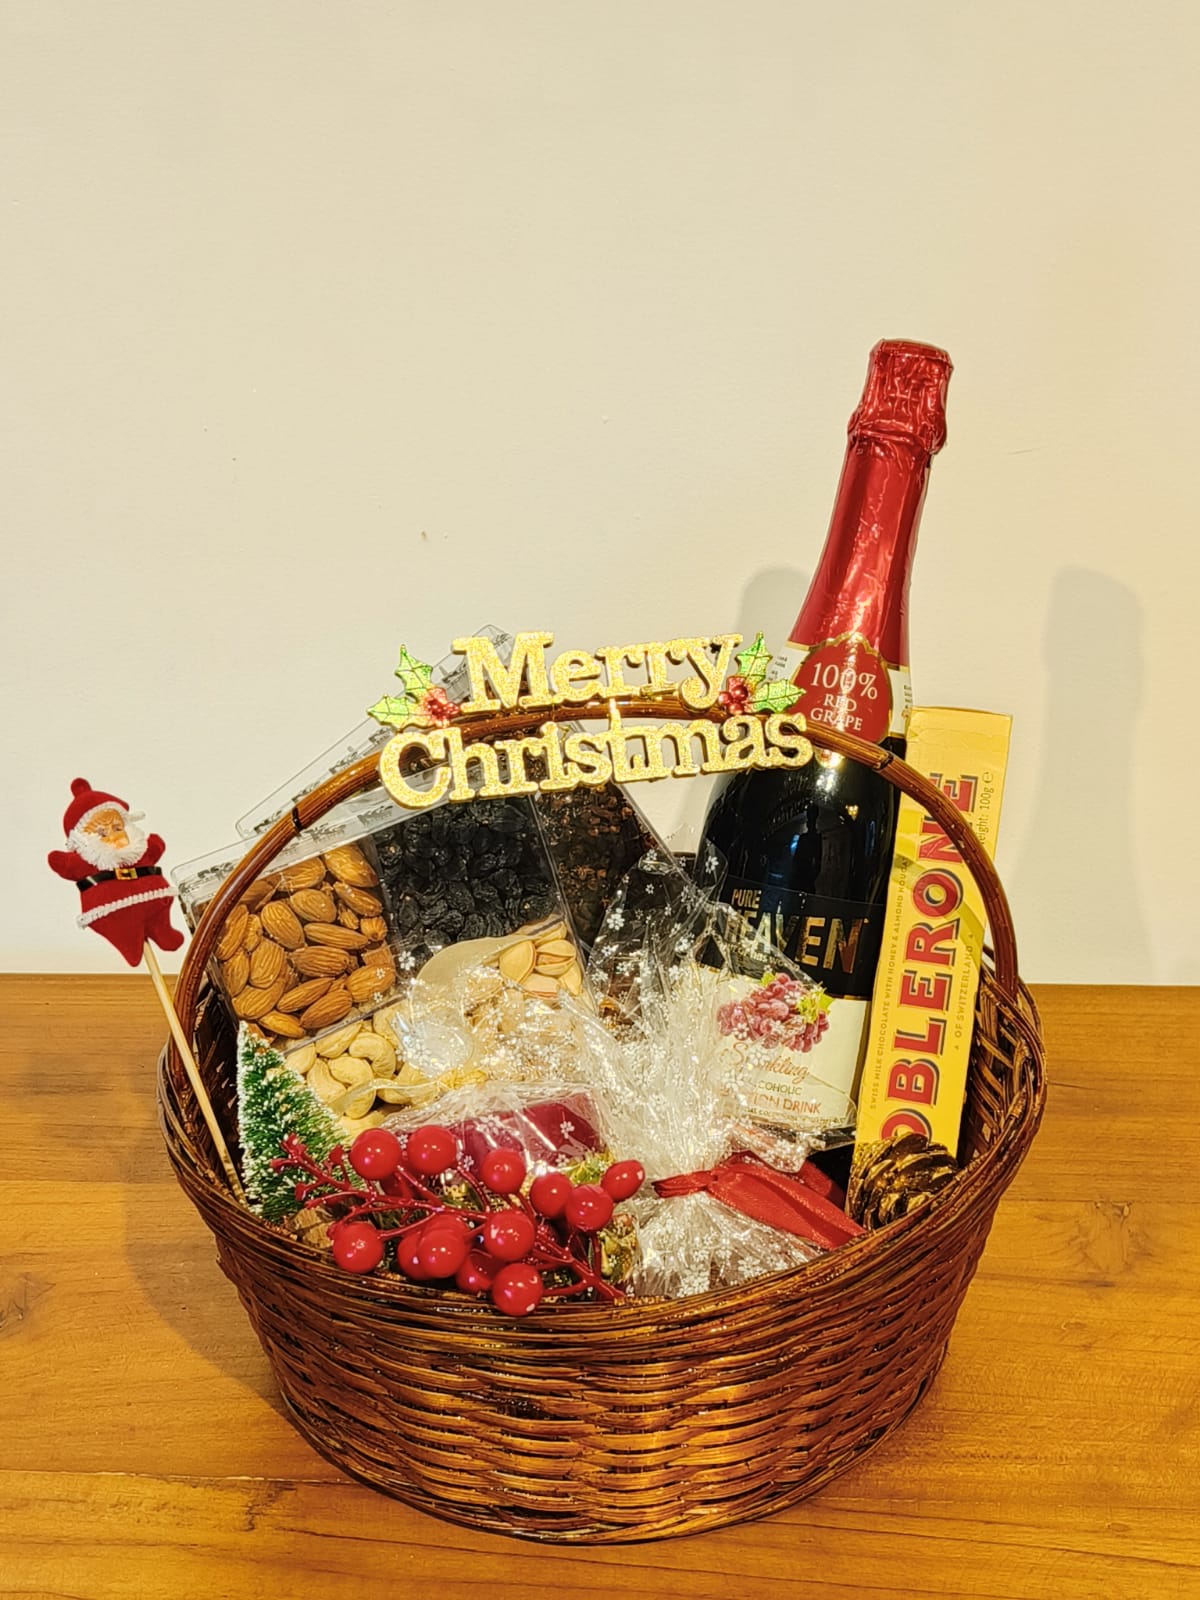 Personalized Christmas Gift Hampers - Secret Santa Gifts